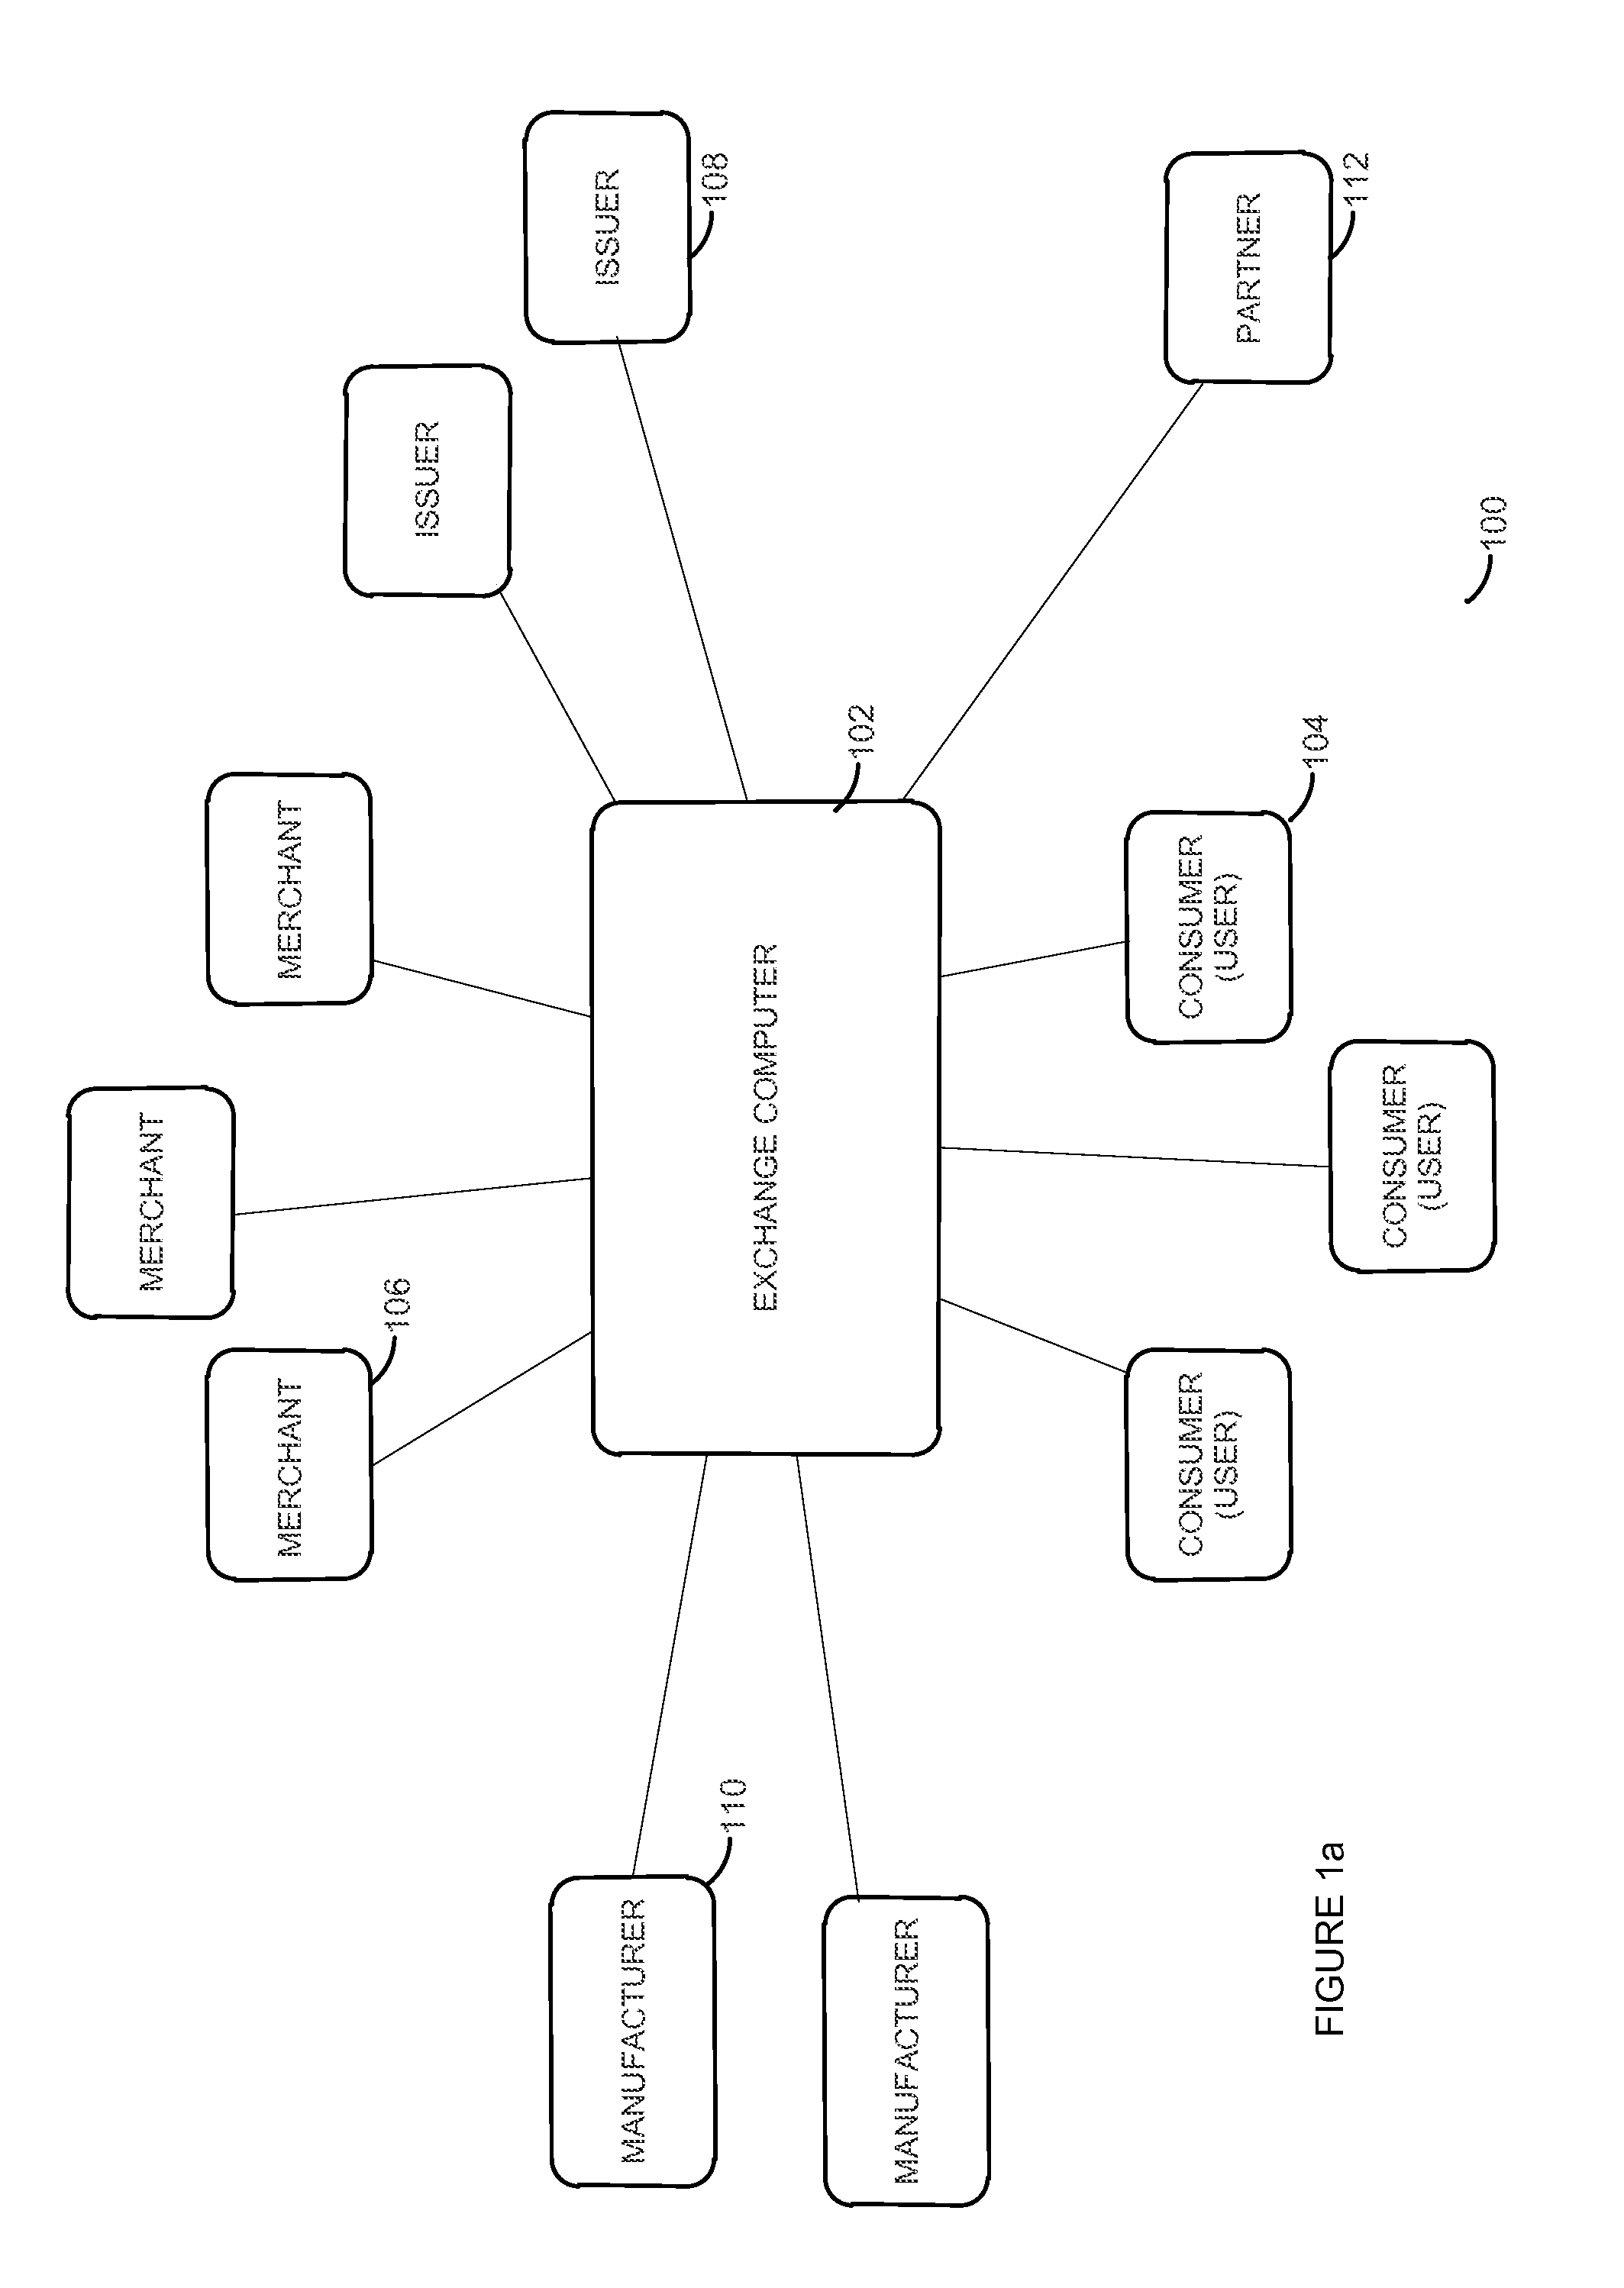 Reward exchange method and system implementing data collection and analysis